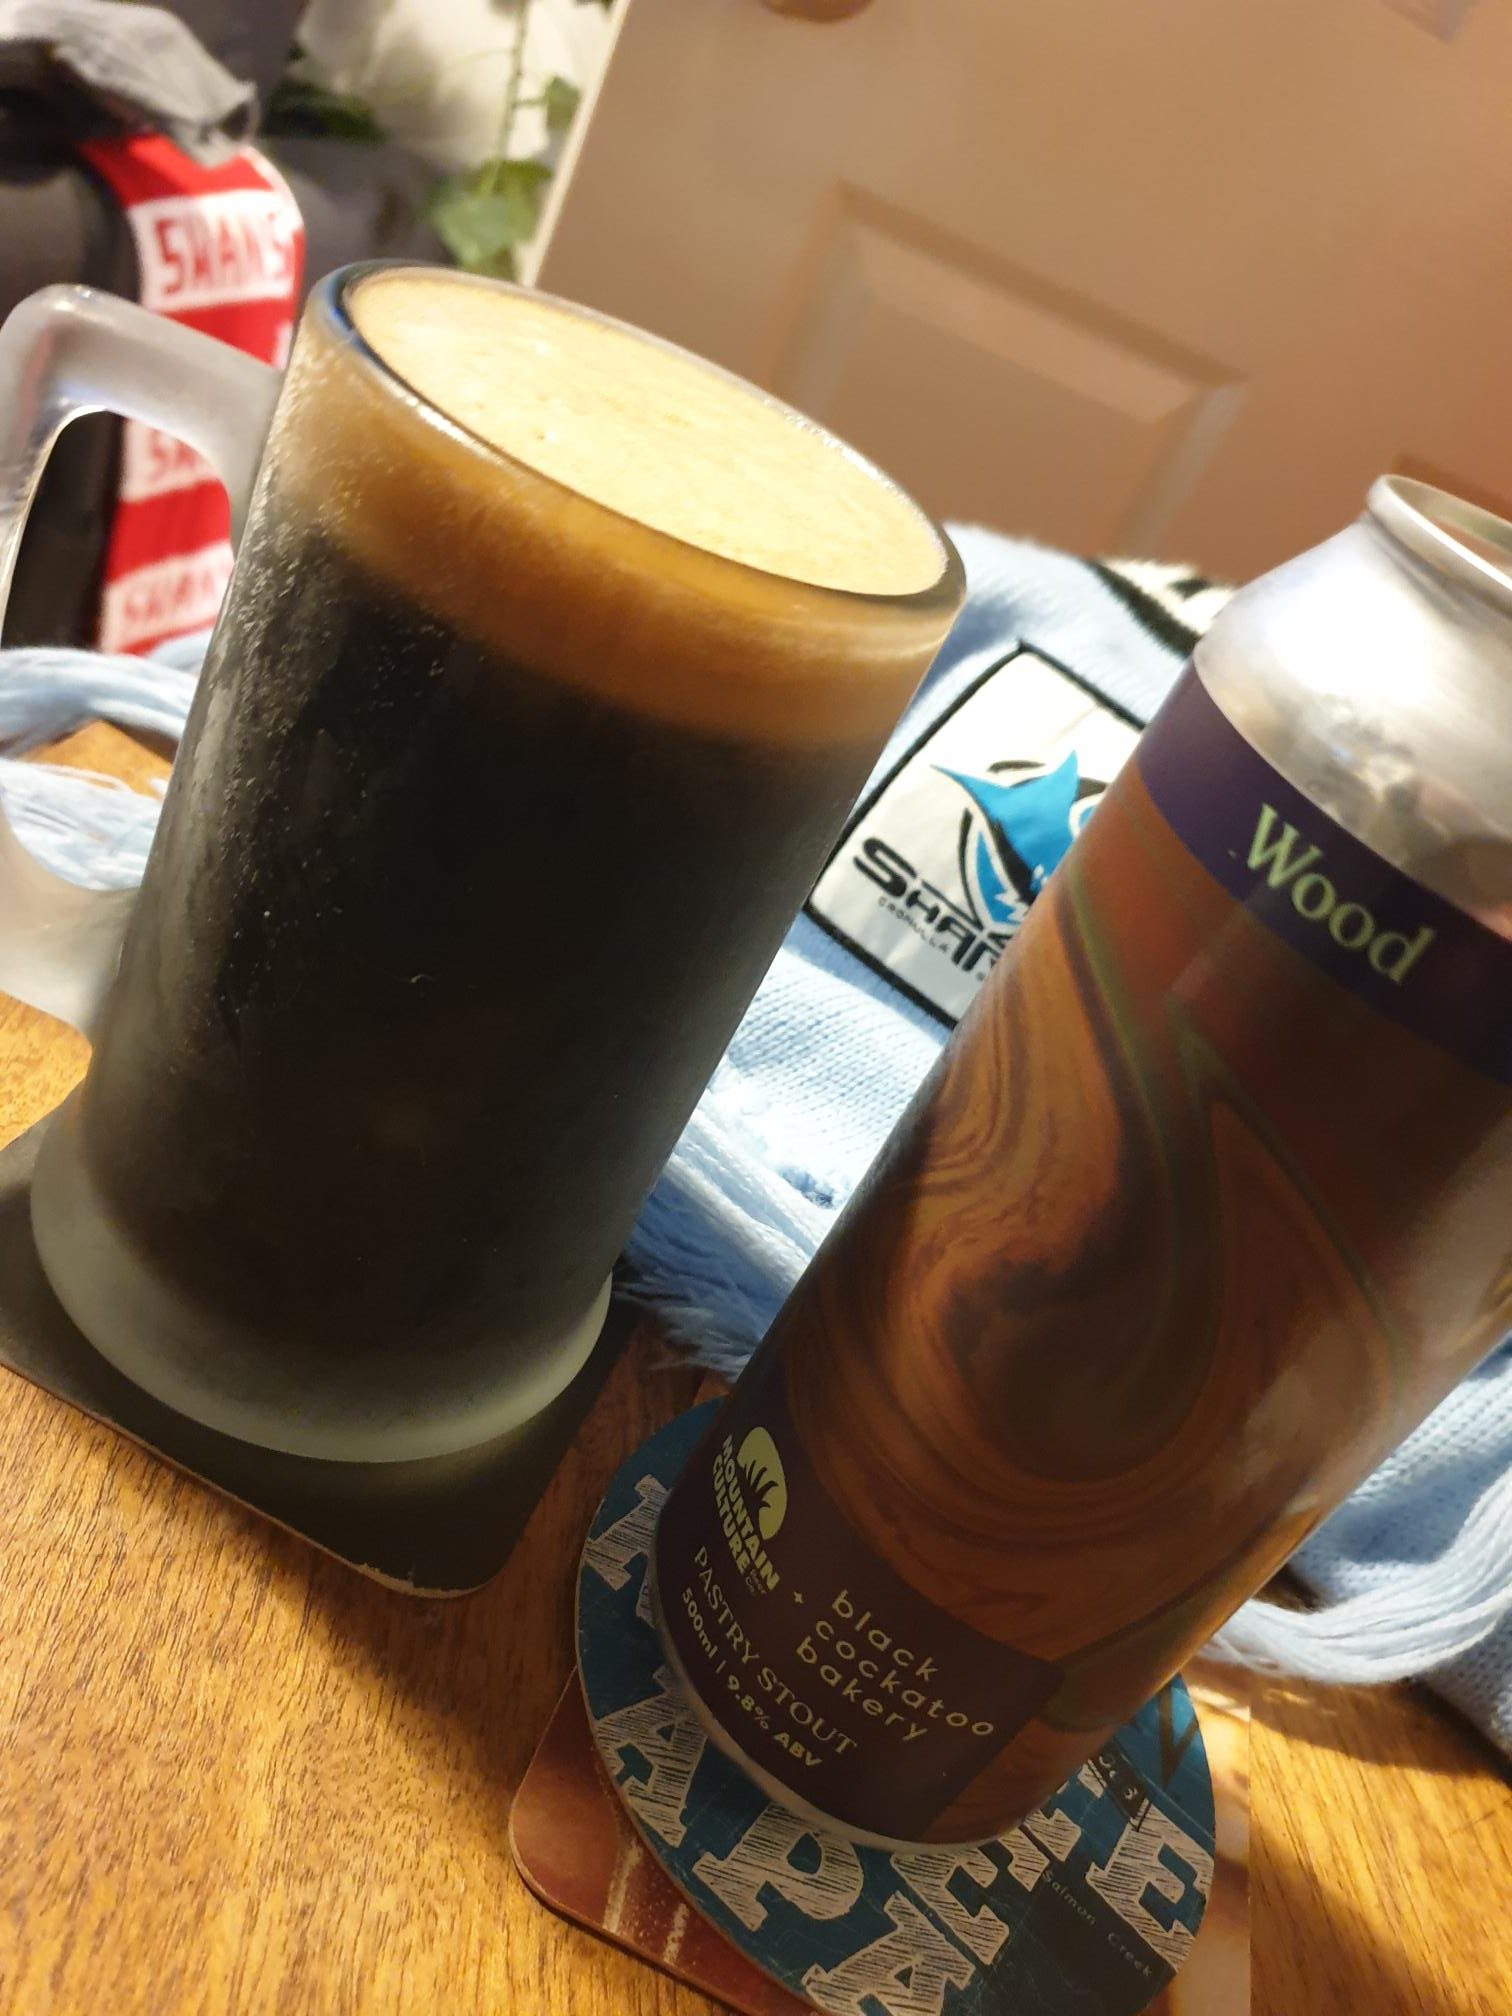 Wood Pastry Stout by Mountain Culture Beer Co.